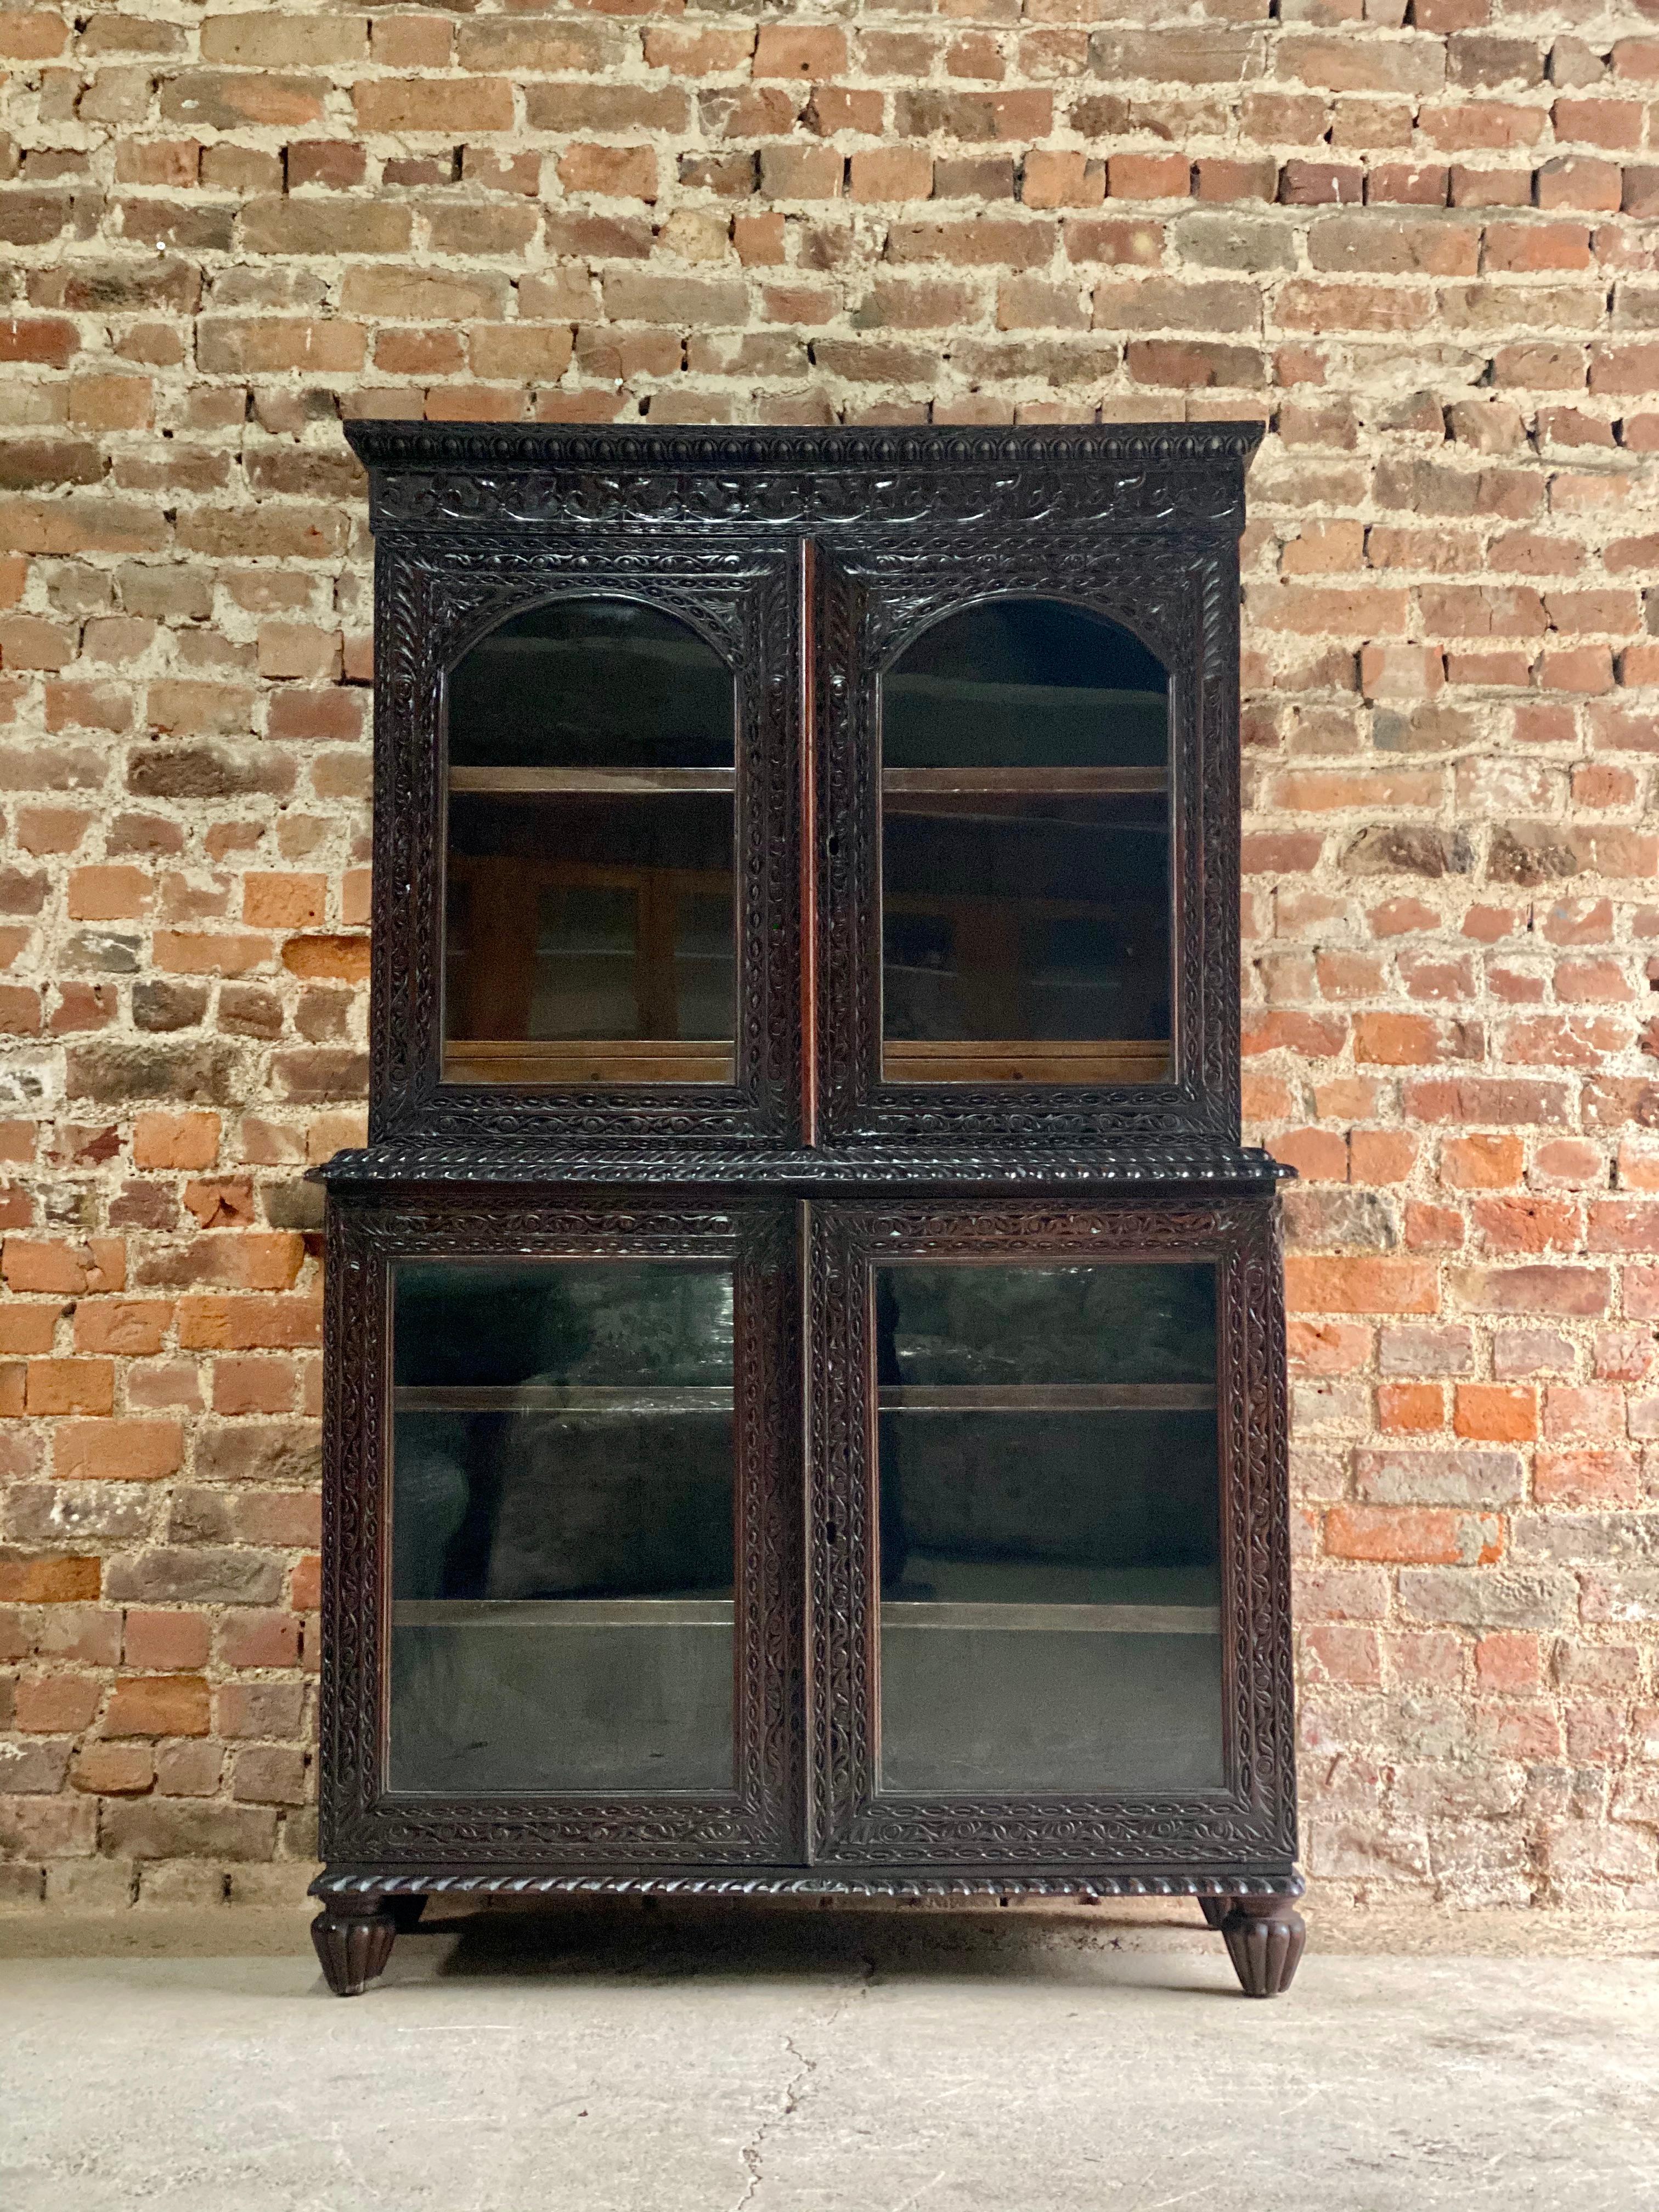 19th century Victorian colonial Anglo-Indian Padouk bookcase, circa 1890

Impressive 19th century Victorian colonial Anglo-Indian Padouk four-door bookcase circa 1890, the ornately carved cornice over a pair of arched glazed doors enclosing a